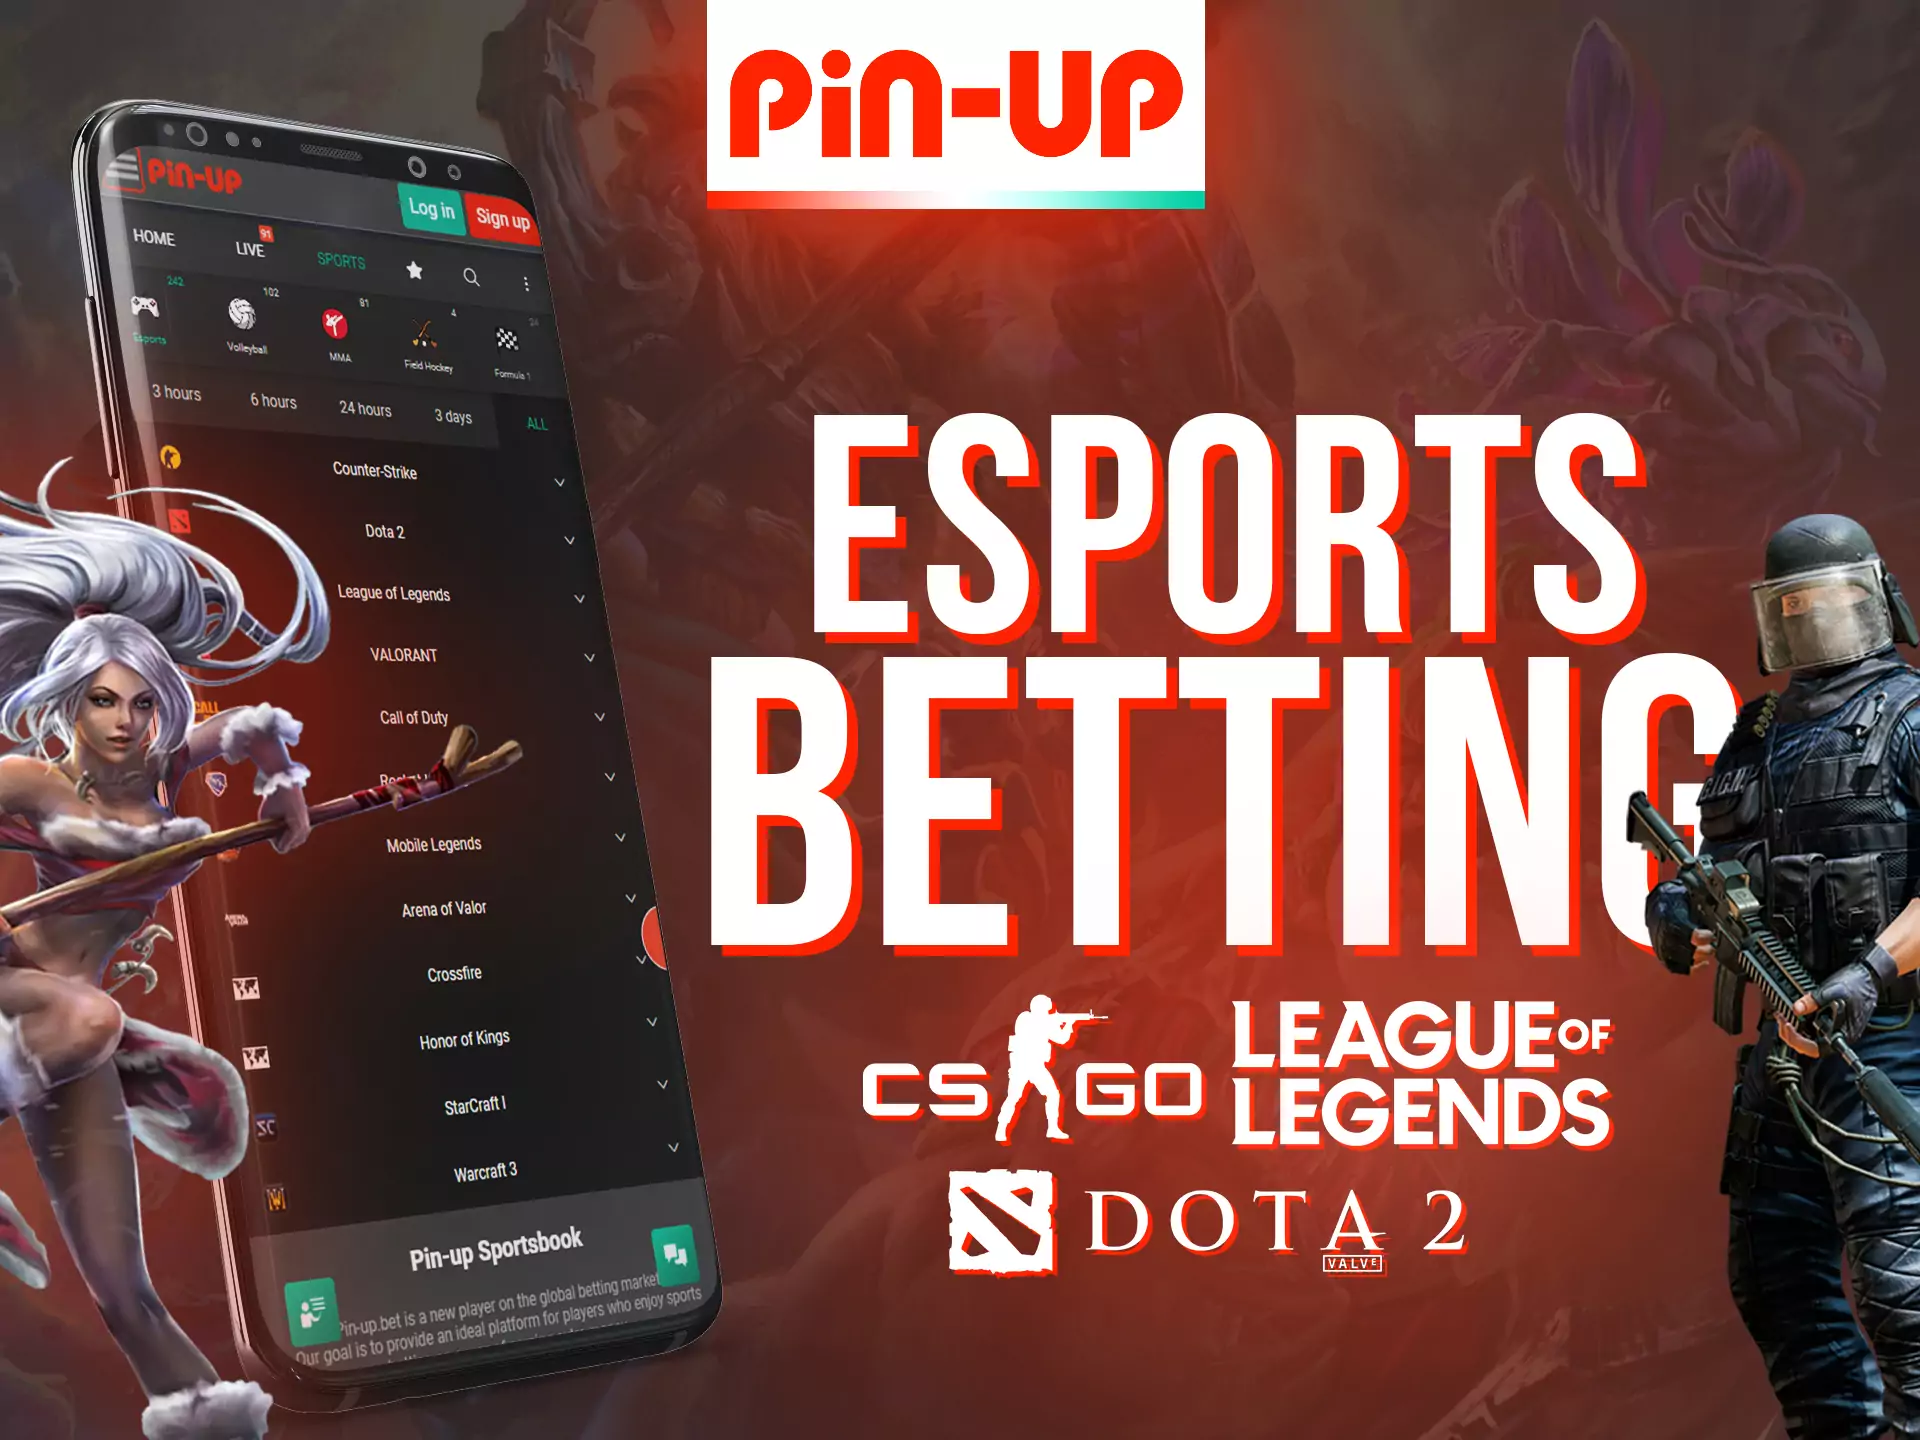 Pin-Up app gives you the opportunity to bet on esports matches.